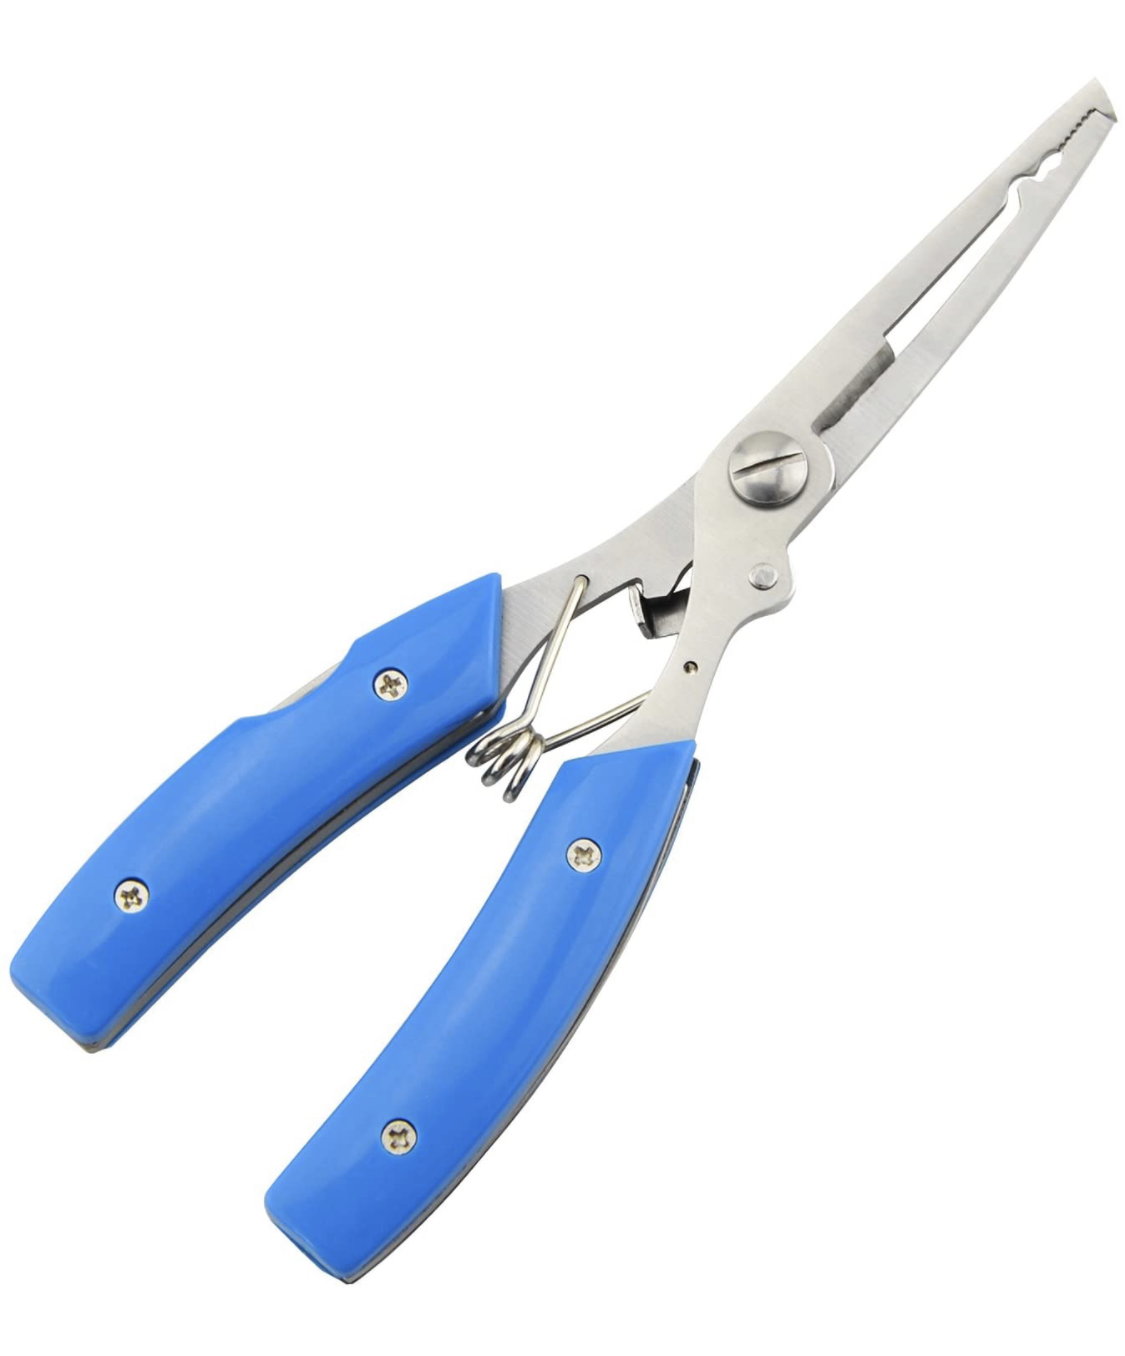 Good fishing pliers - Page 2 - The Hull Truth - Boating and Fishing Forum